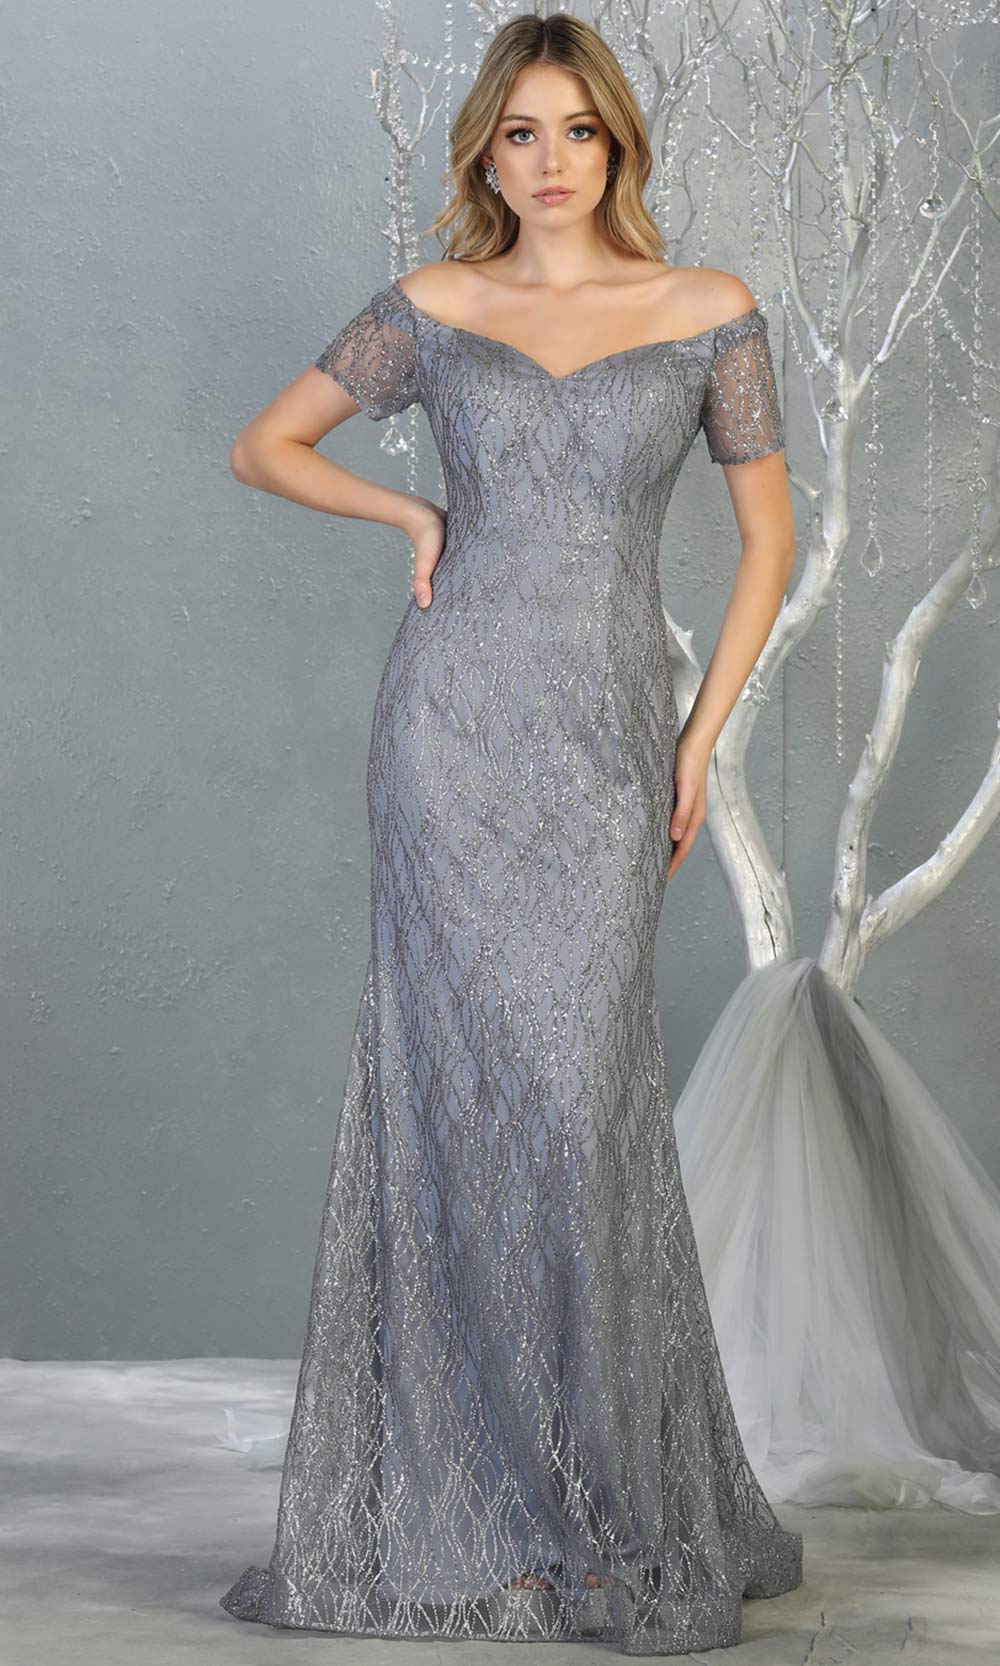 Mayqueen MQ1824 long dusty blue fitted sequin glittery dress w/off shoulder. Full length blue grey gown is perfect for enagagement/e-shoot dress, wedding reception dress, indowestern gown, bridesmaid, formal evening party dress, prom. Plus sizes avail.jpg